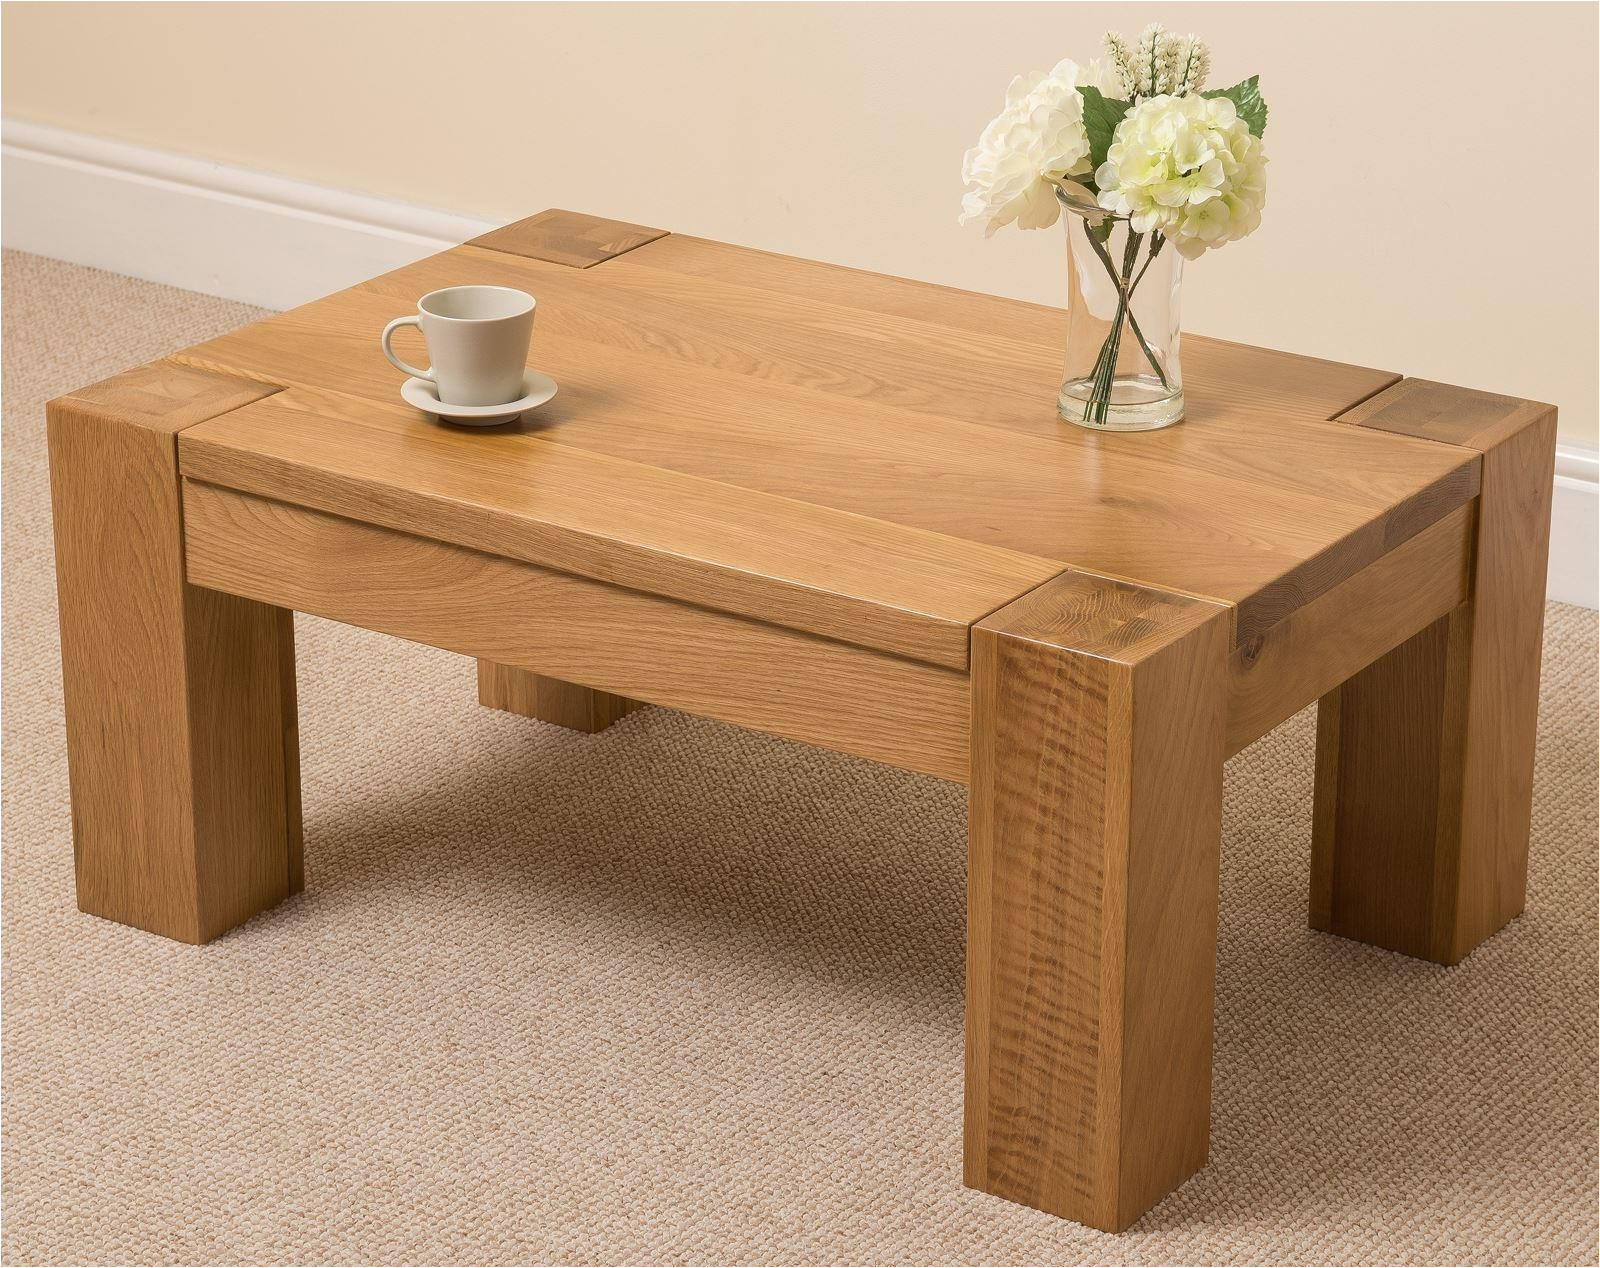 small oak coffee table sale collection small coffee tables for sale leather top coffee table